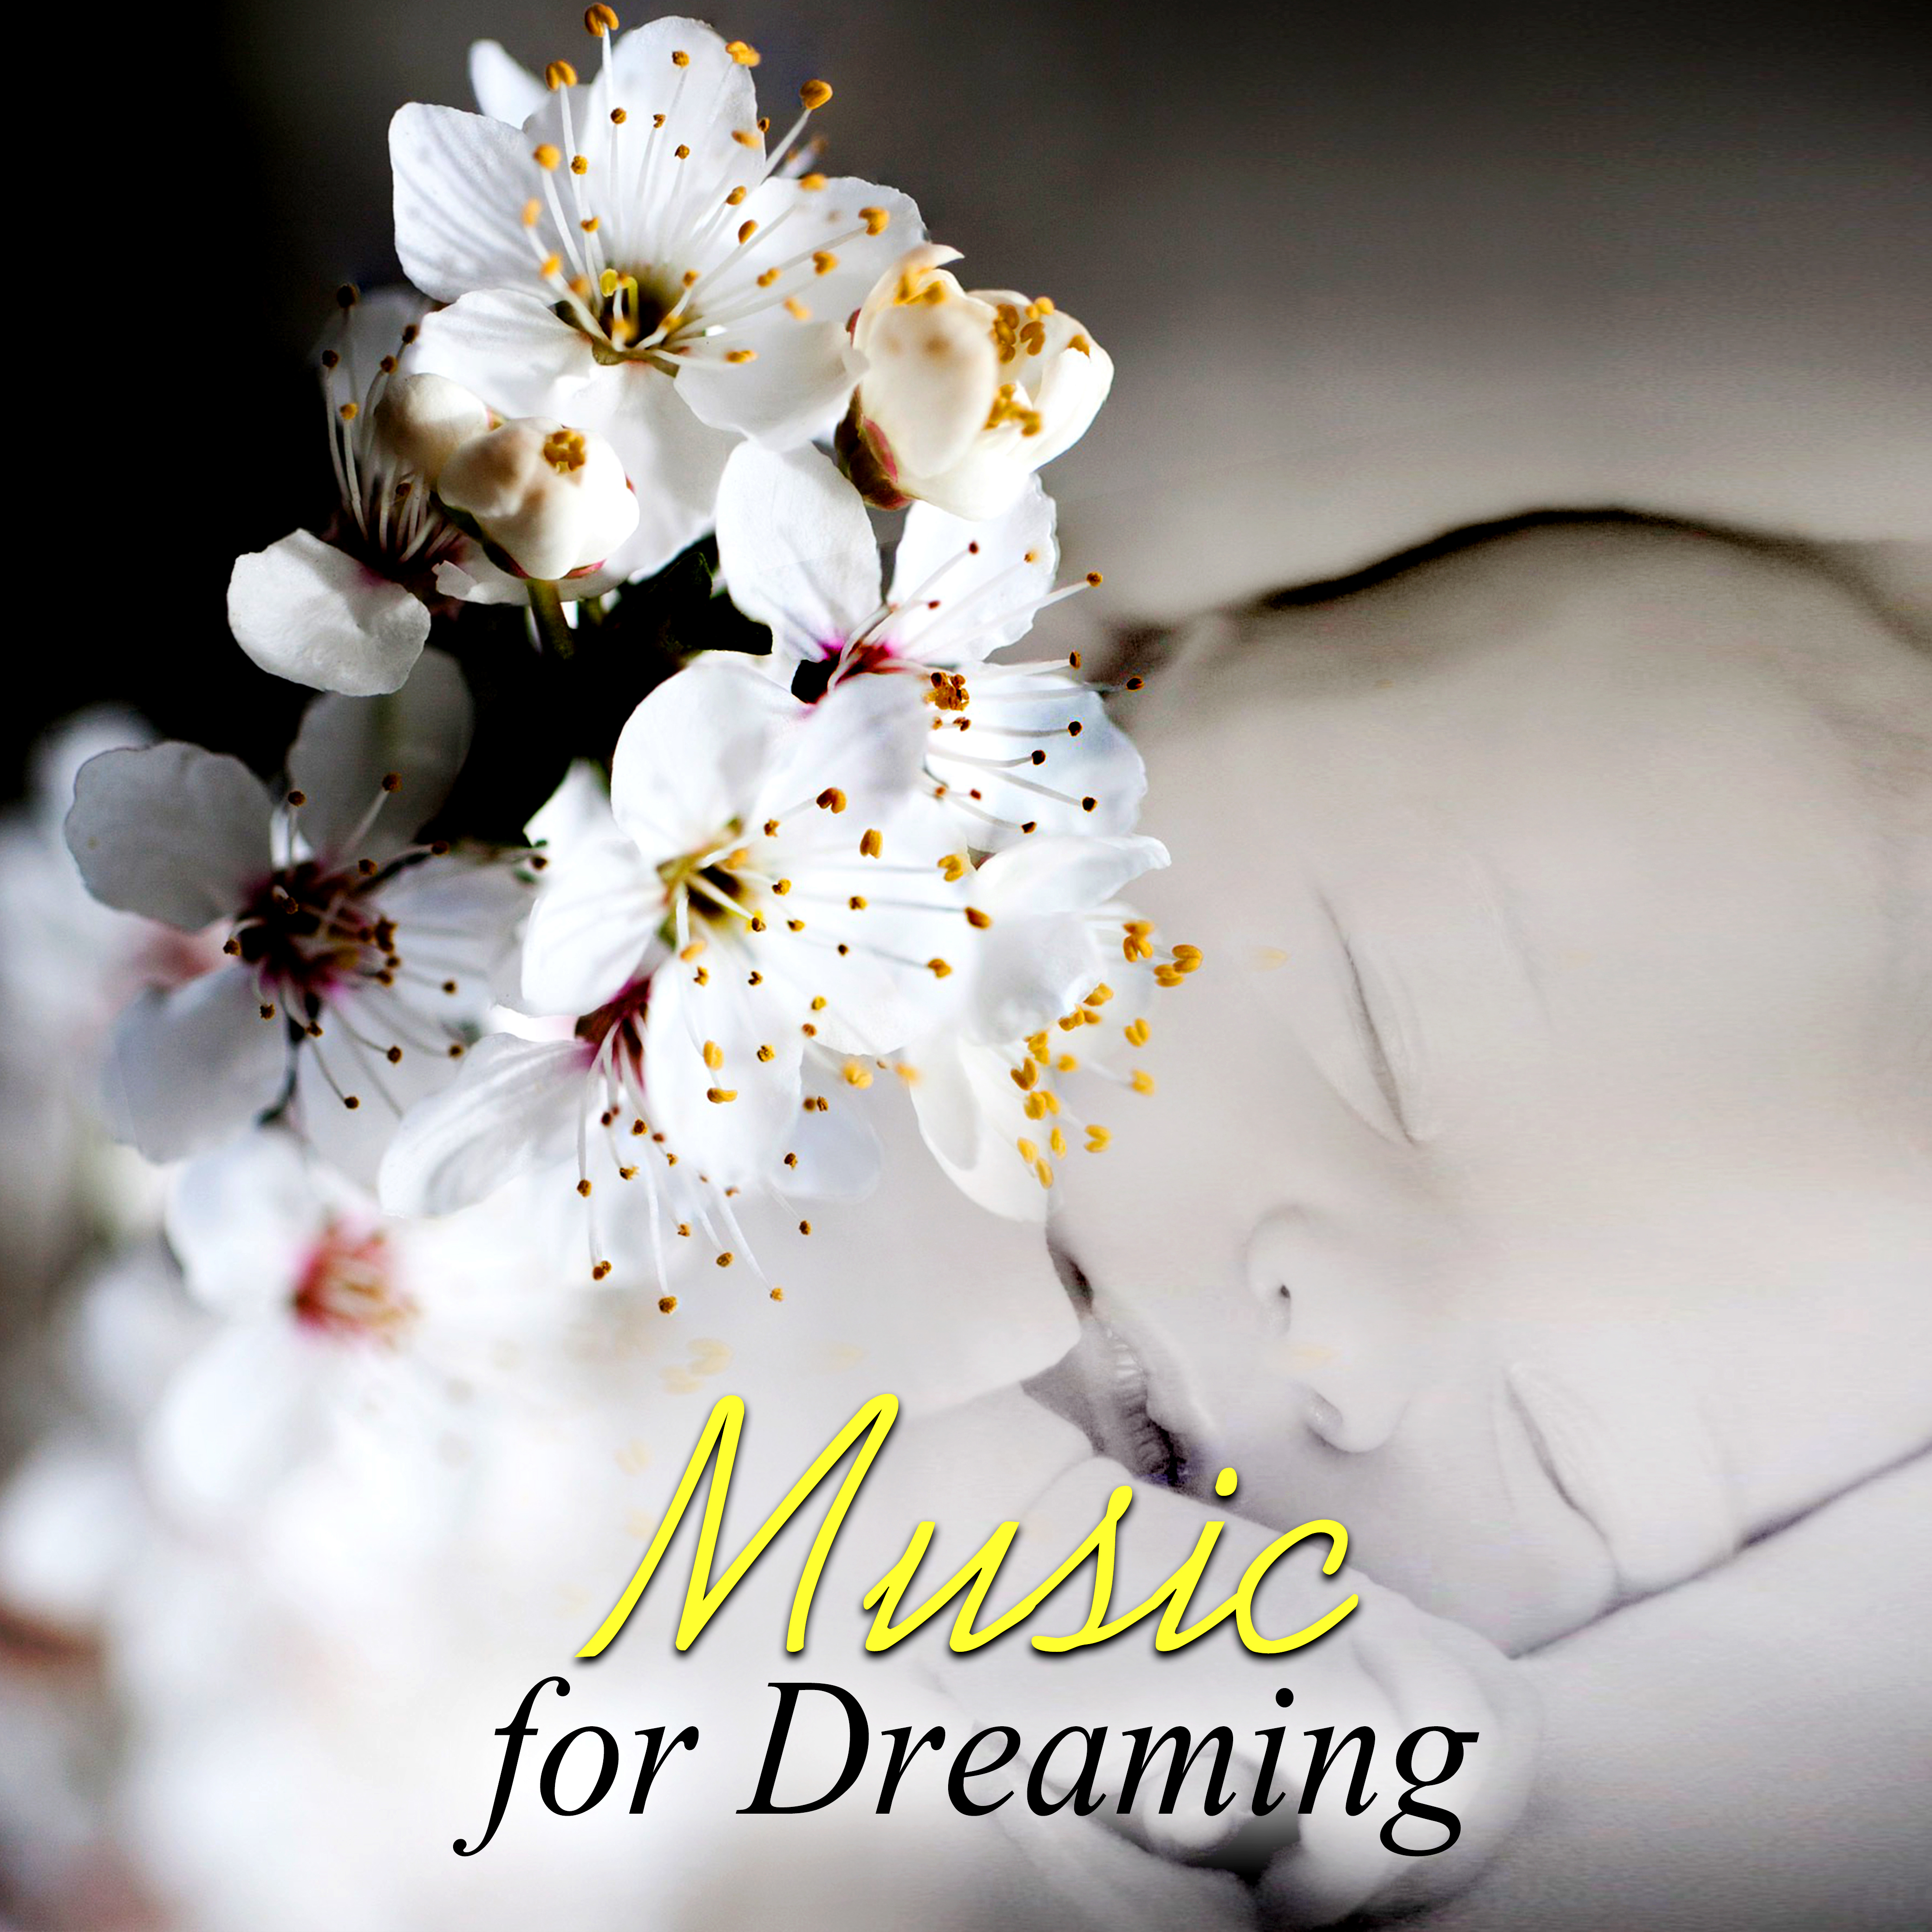 Music for Dreaming - Soothing & Calming Sounds for Babies, Relaxing Instrumental Music for Good Mood, Baby Nature Sounds World Music for Sleeping